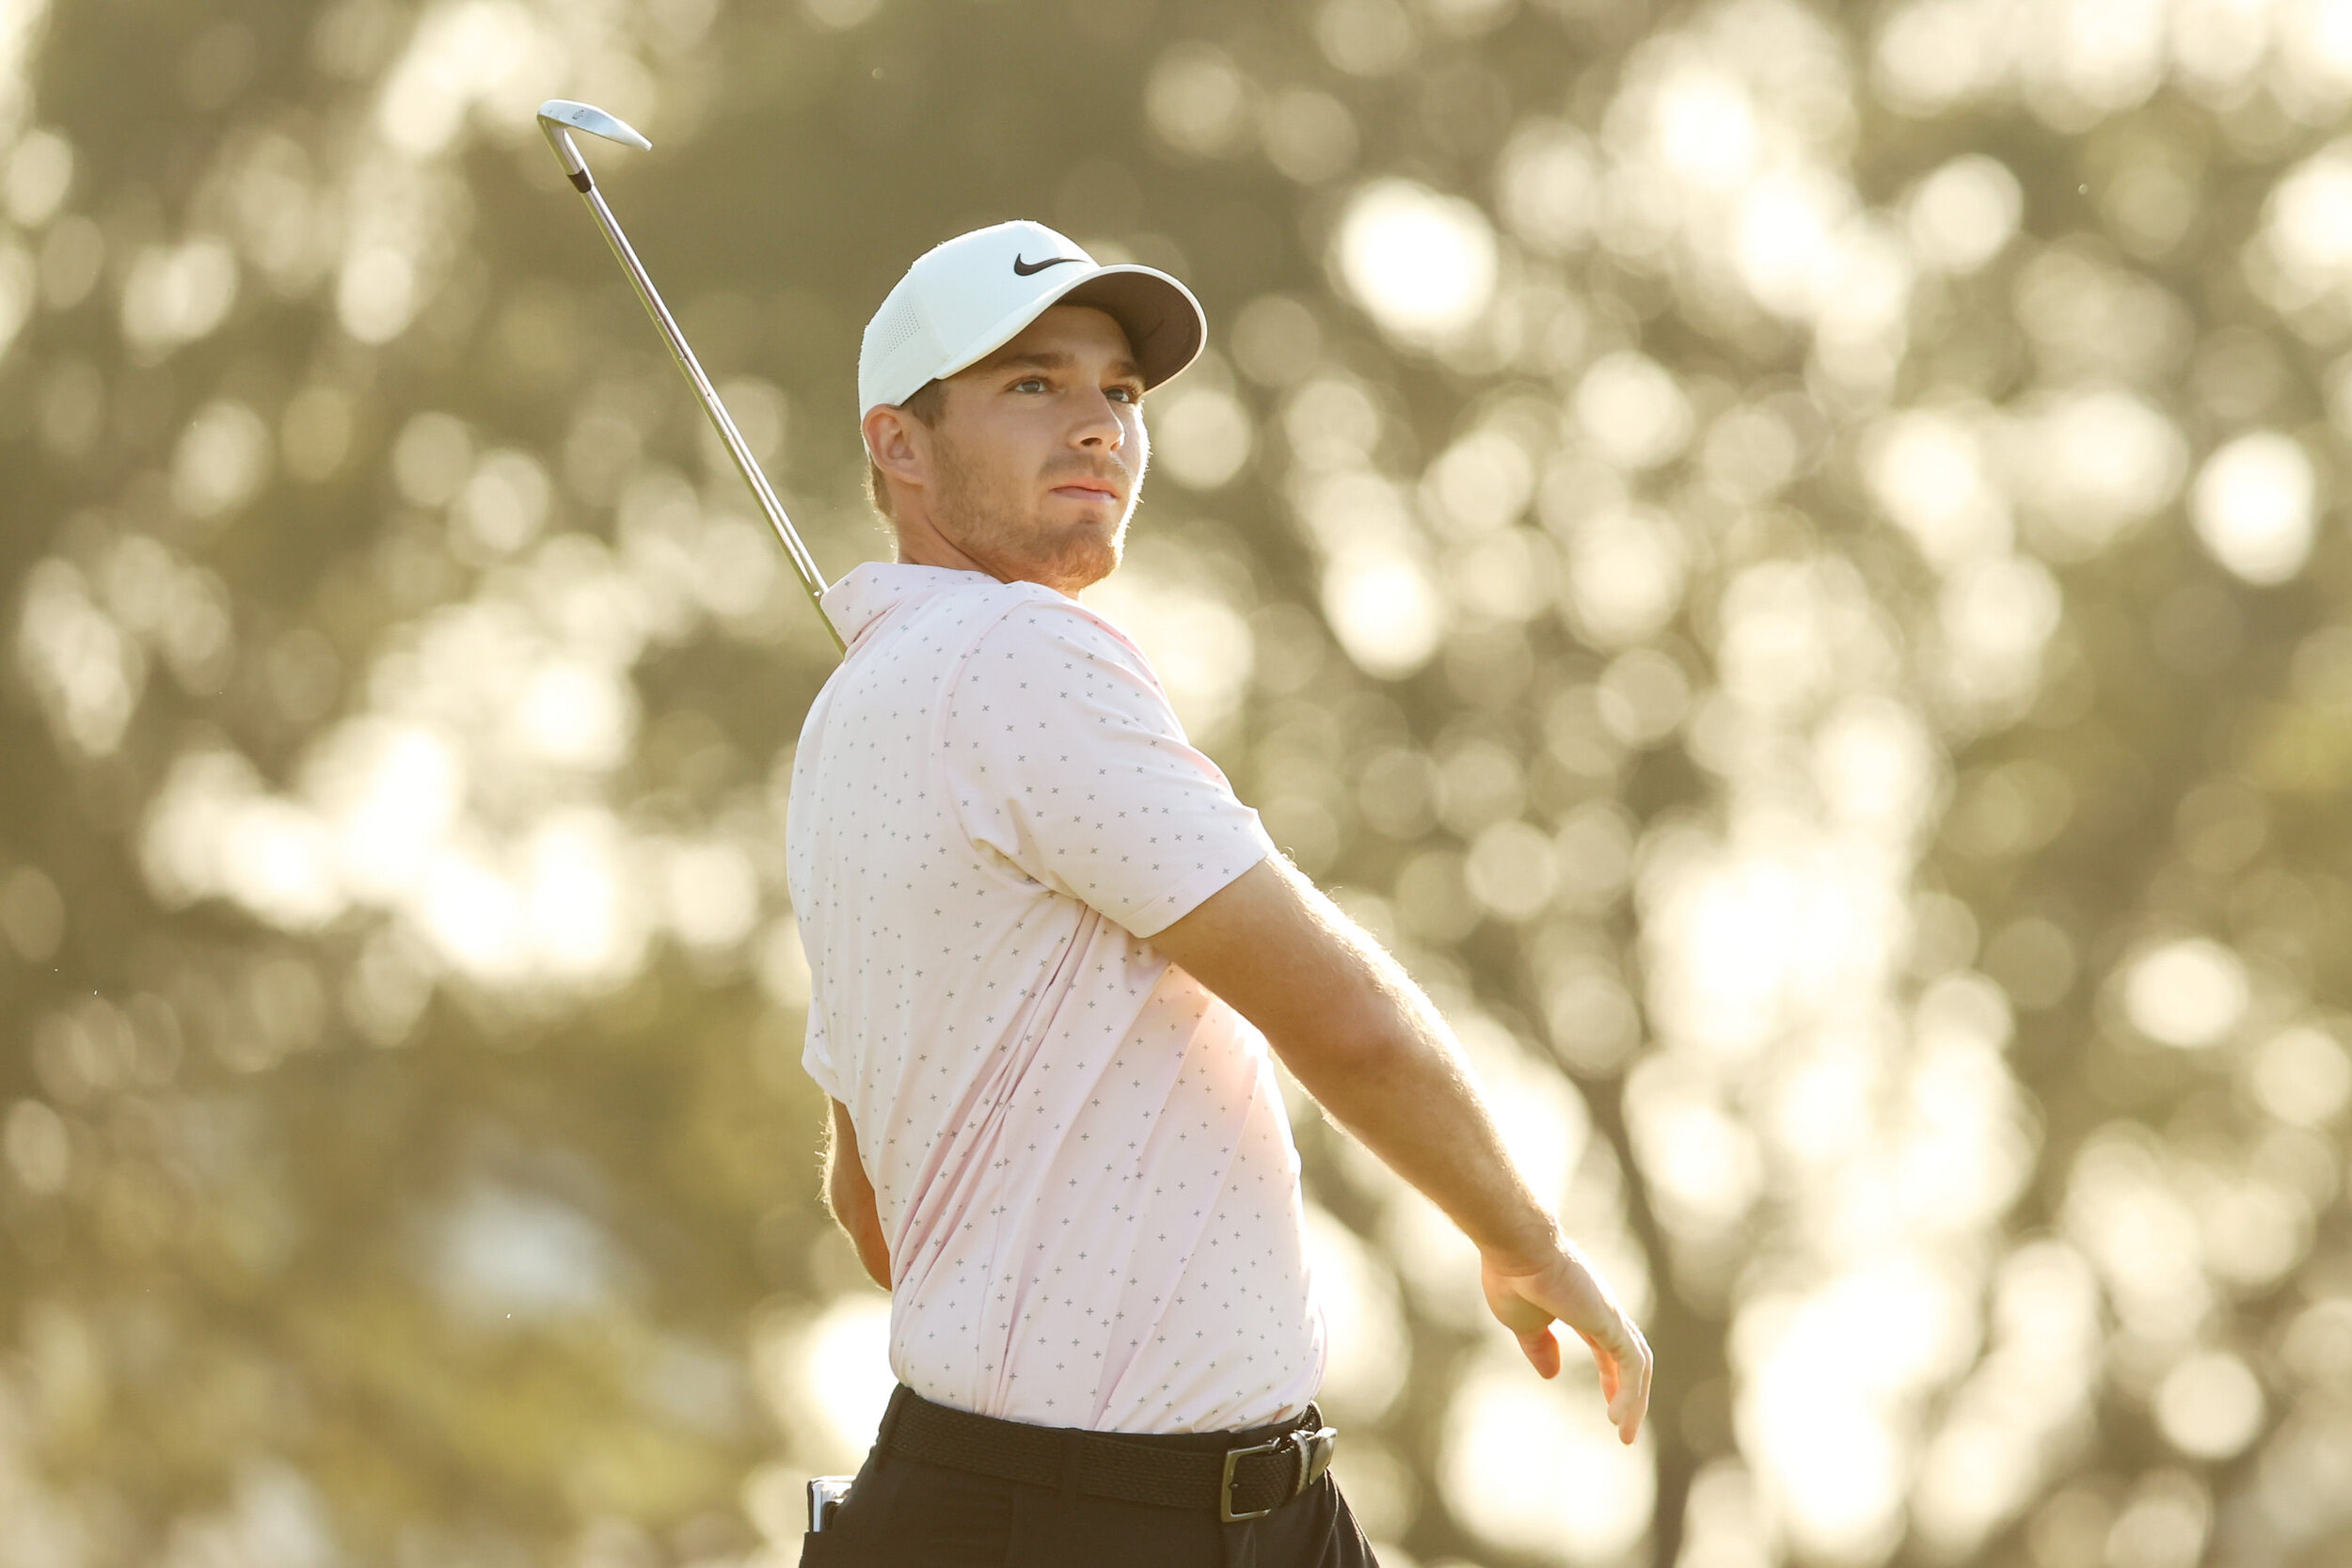  PALM BEACH GARDENS, FLORIDA - MARCH 18: Aaron Wise of the United States plays his shot from the fifth tee during the first round of The Honda Classic at PGA National Champion course on March 18, 2021 in Palm Beach Gardens, Florida. (Photo by Cliff H